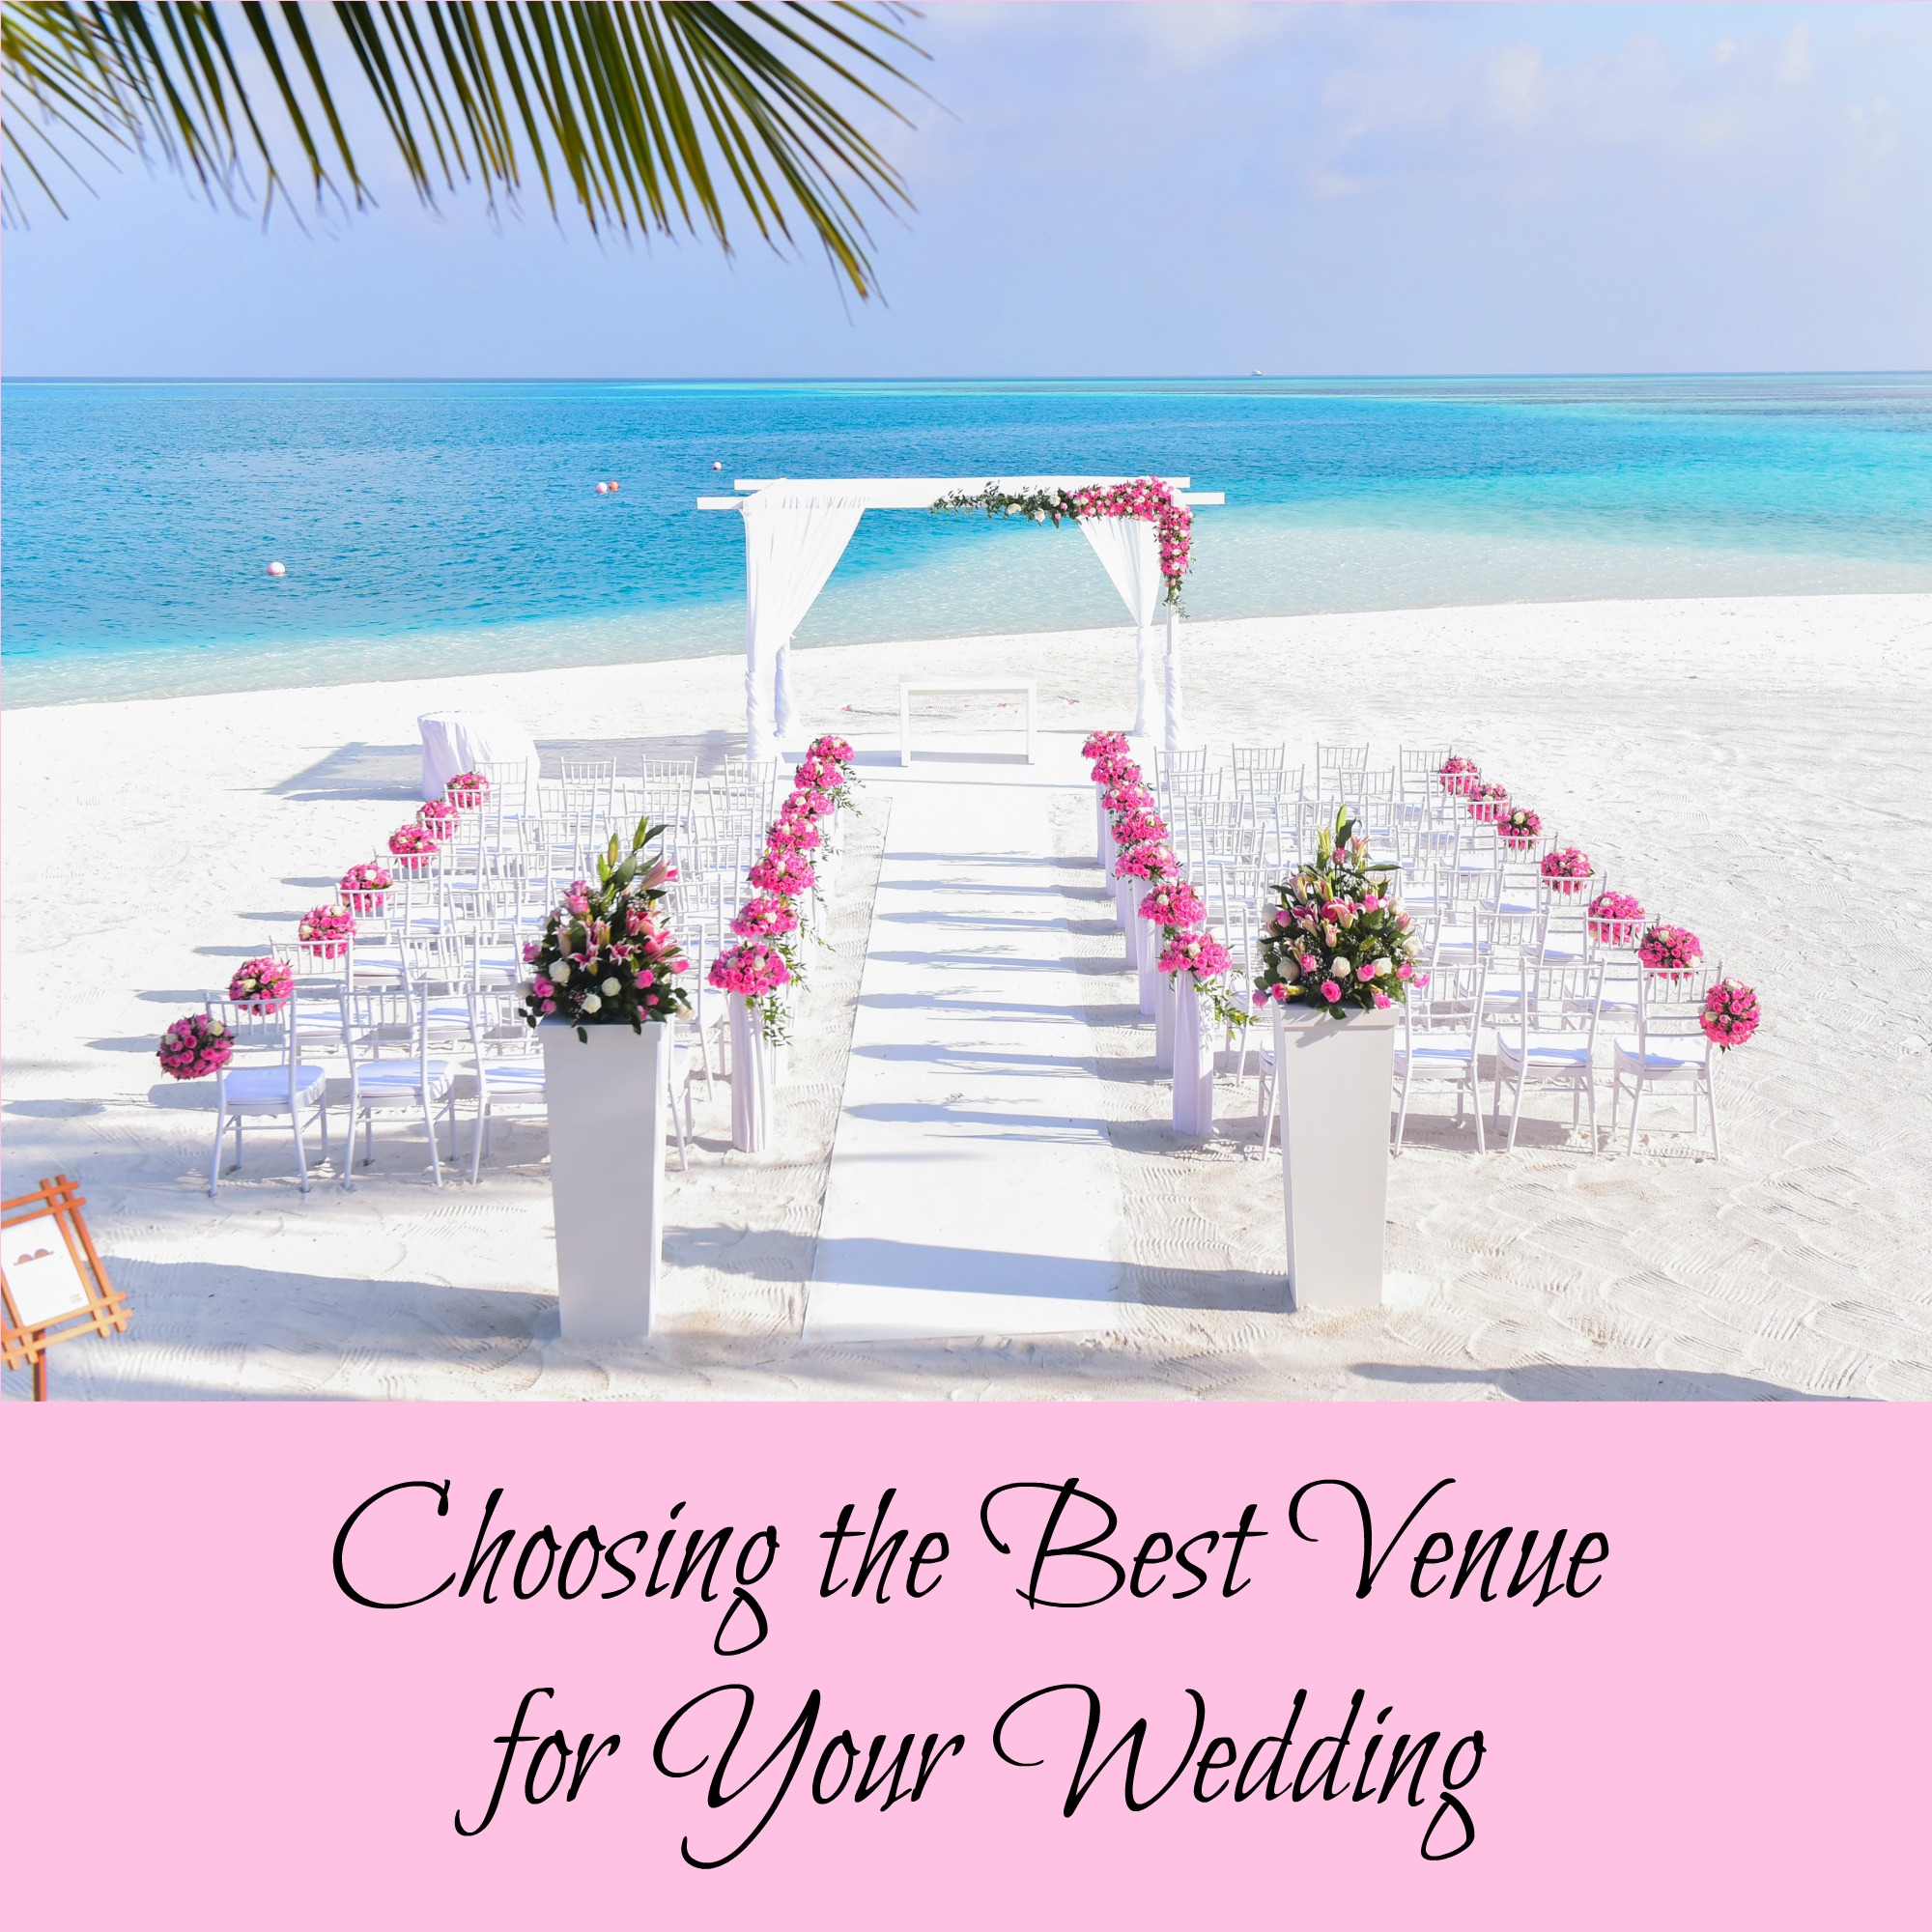 Choosing the Best Venue for Your Wedding